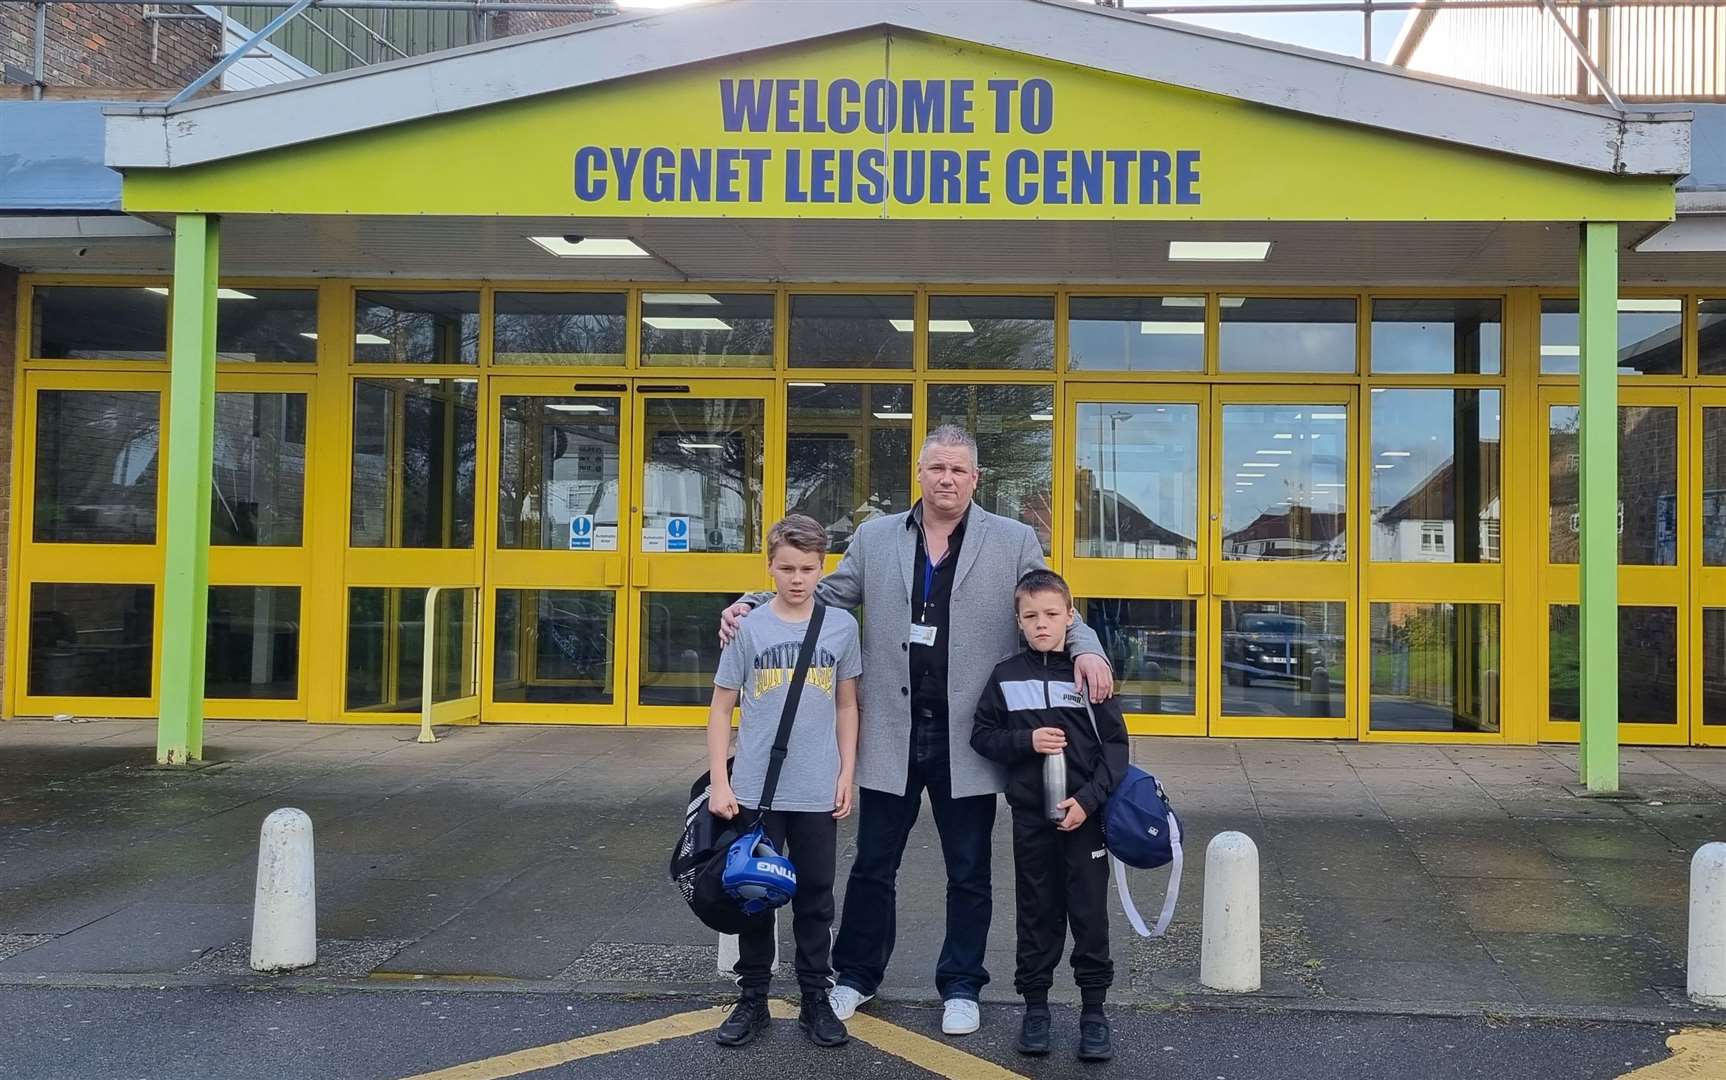 Daniel Anderson and his sons Connor, left, and Louis, right, at Cygnet Leisure Centre. Photo: Daniel Anderson